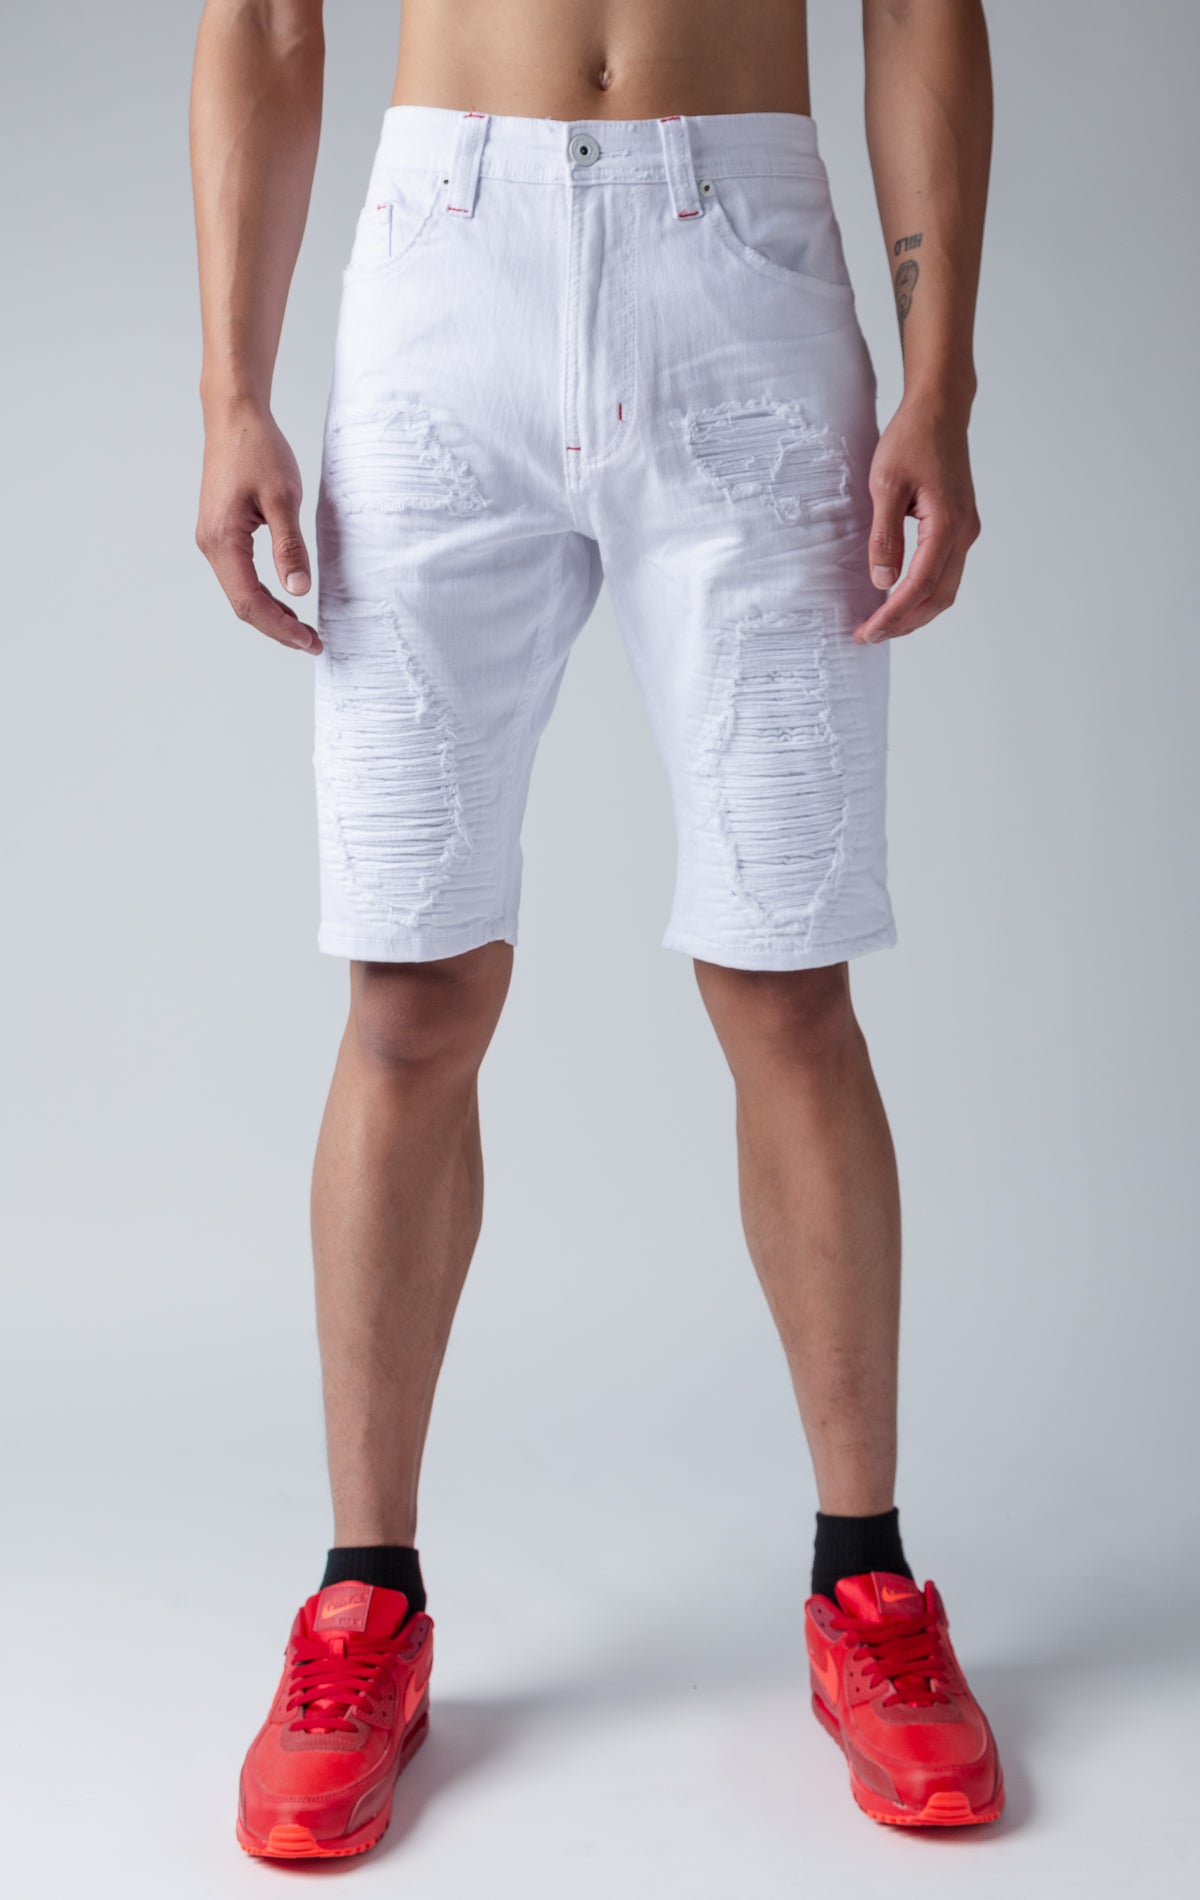 White denim shredded shorts with fused shreds, crinkle effect through out